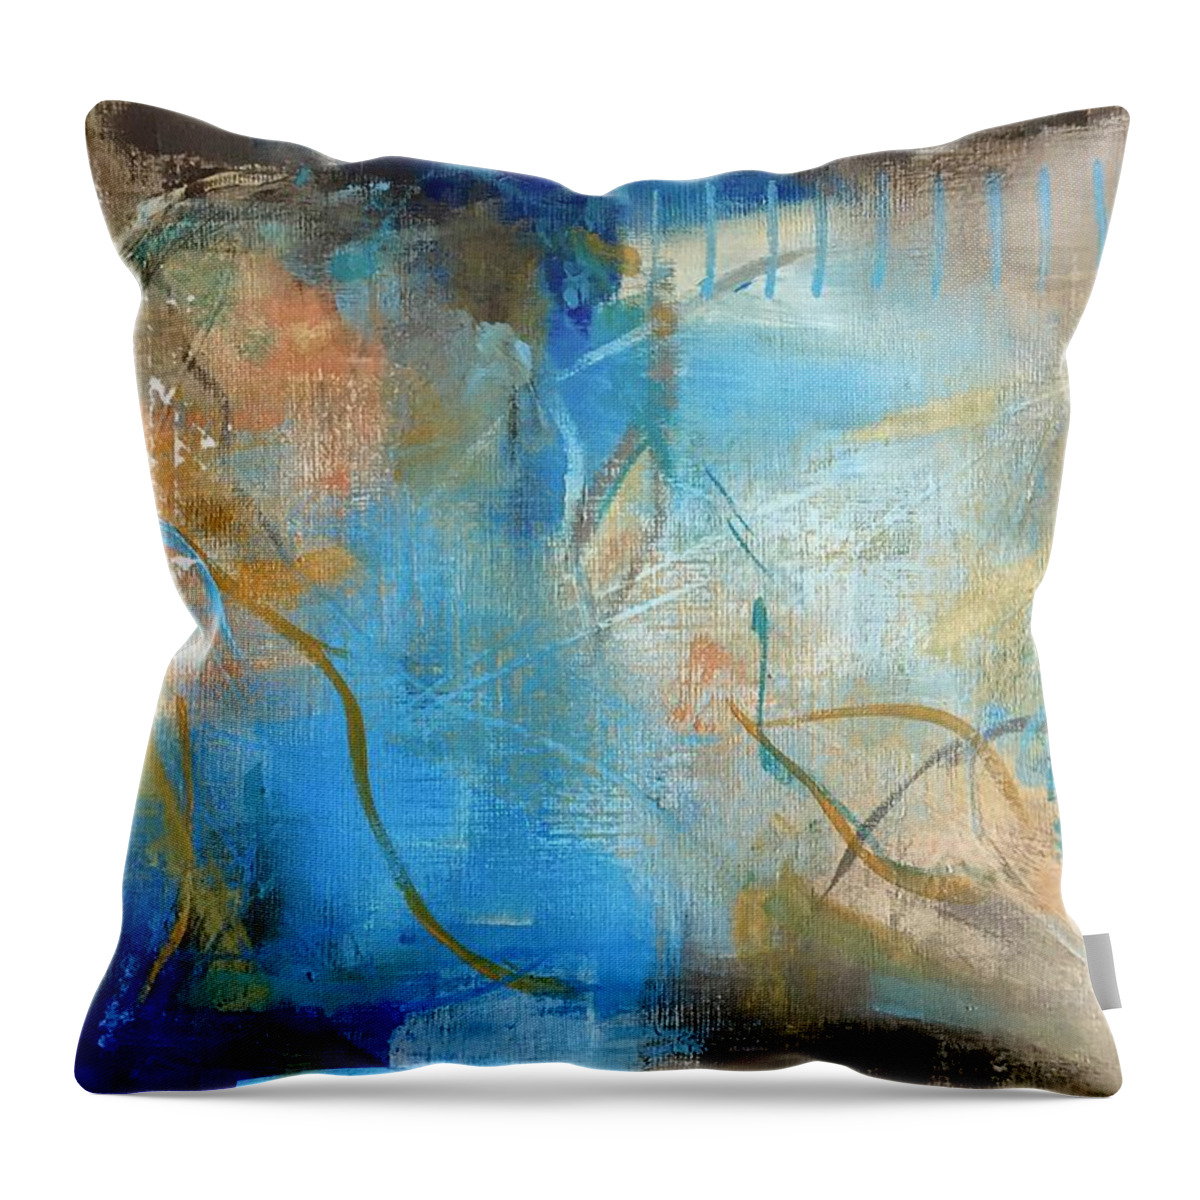 Acrylic Painting Throw Pillow featuring the painting Blue Below by Suzzanna Frank